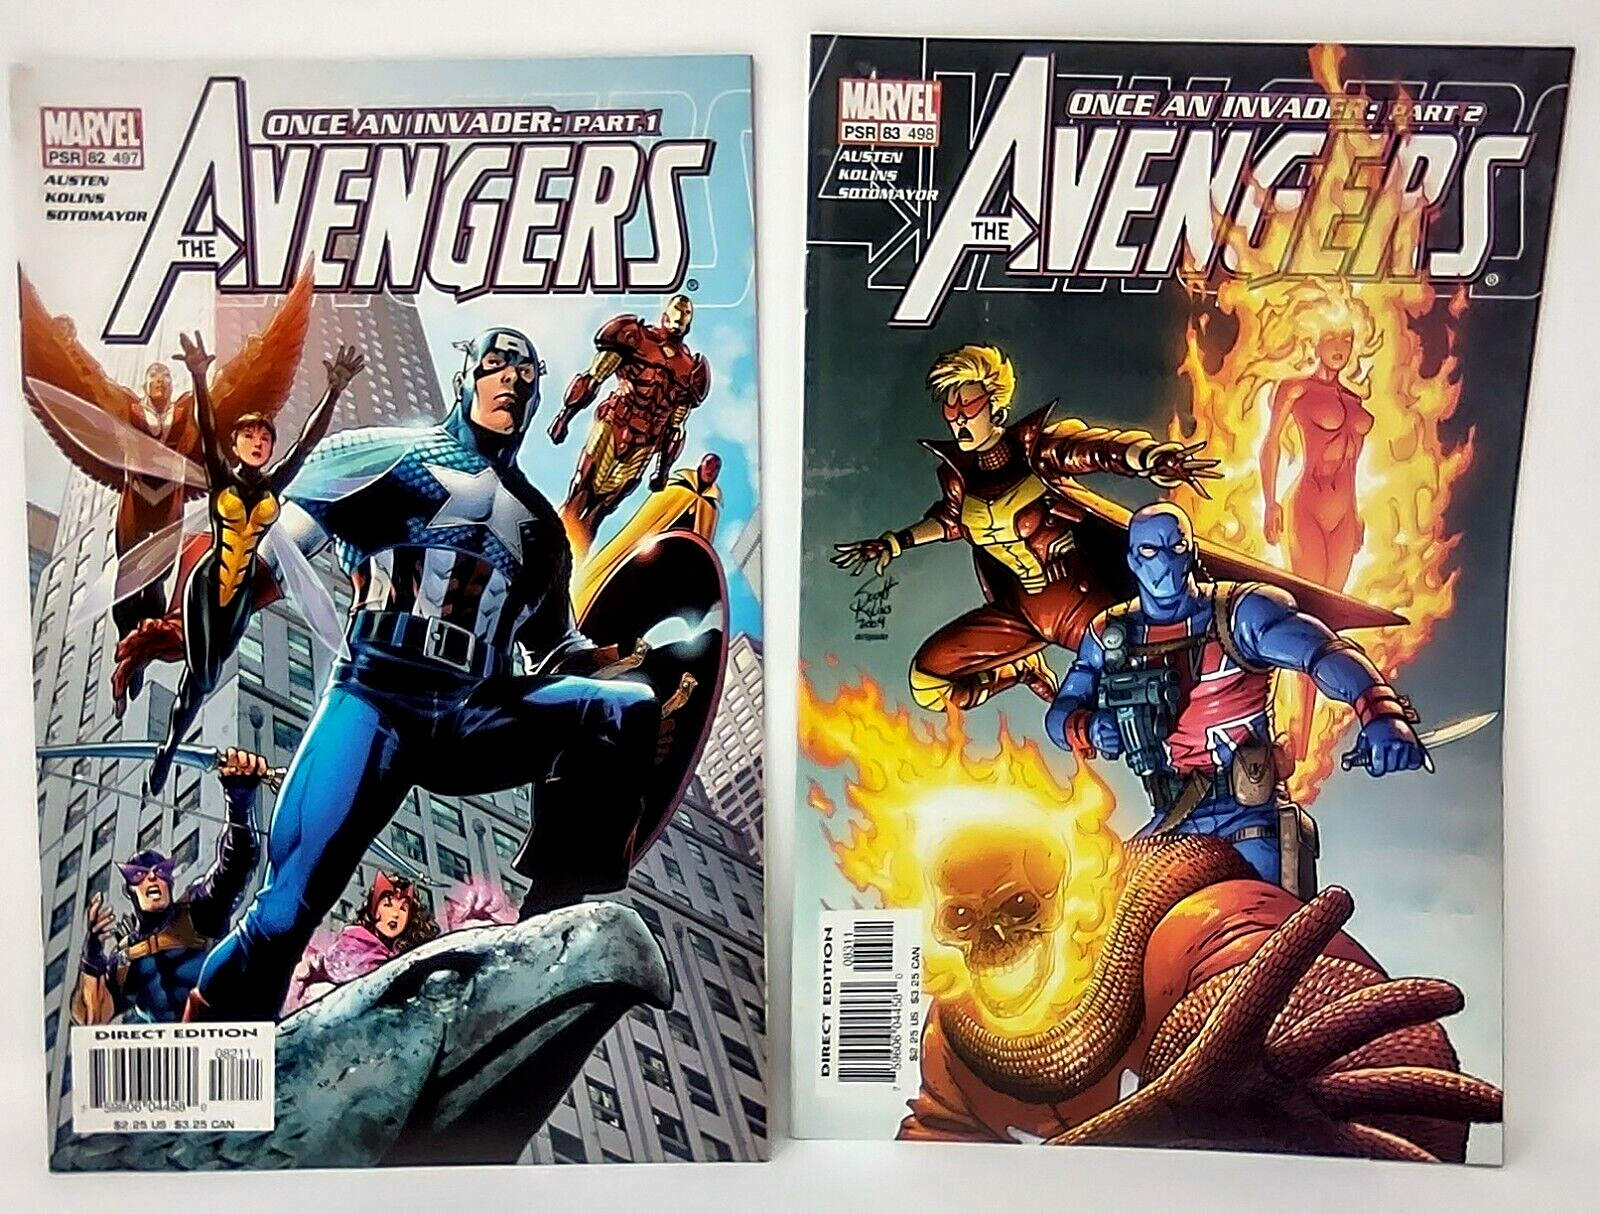 The Avengers Volume 3 Issues 82 83 Marvel Comics 2004 Part 1 And 2